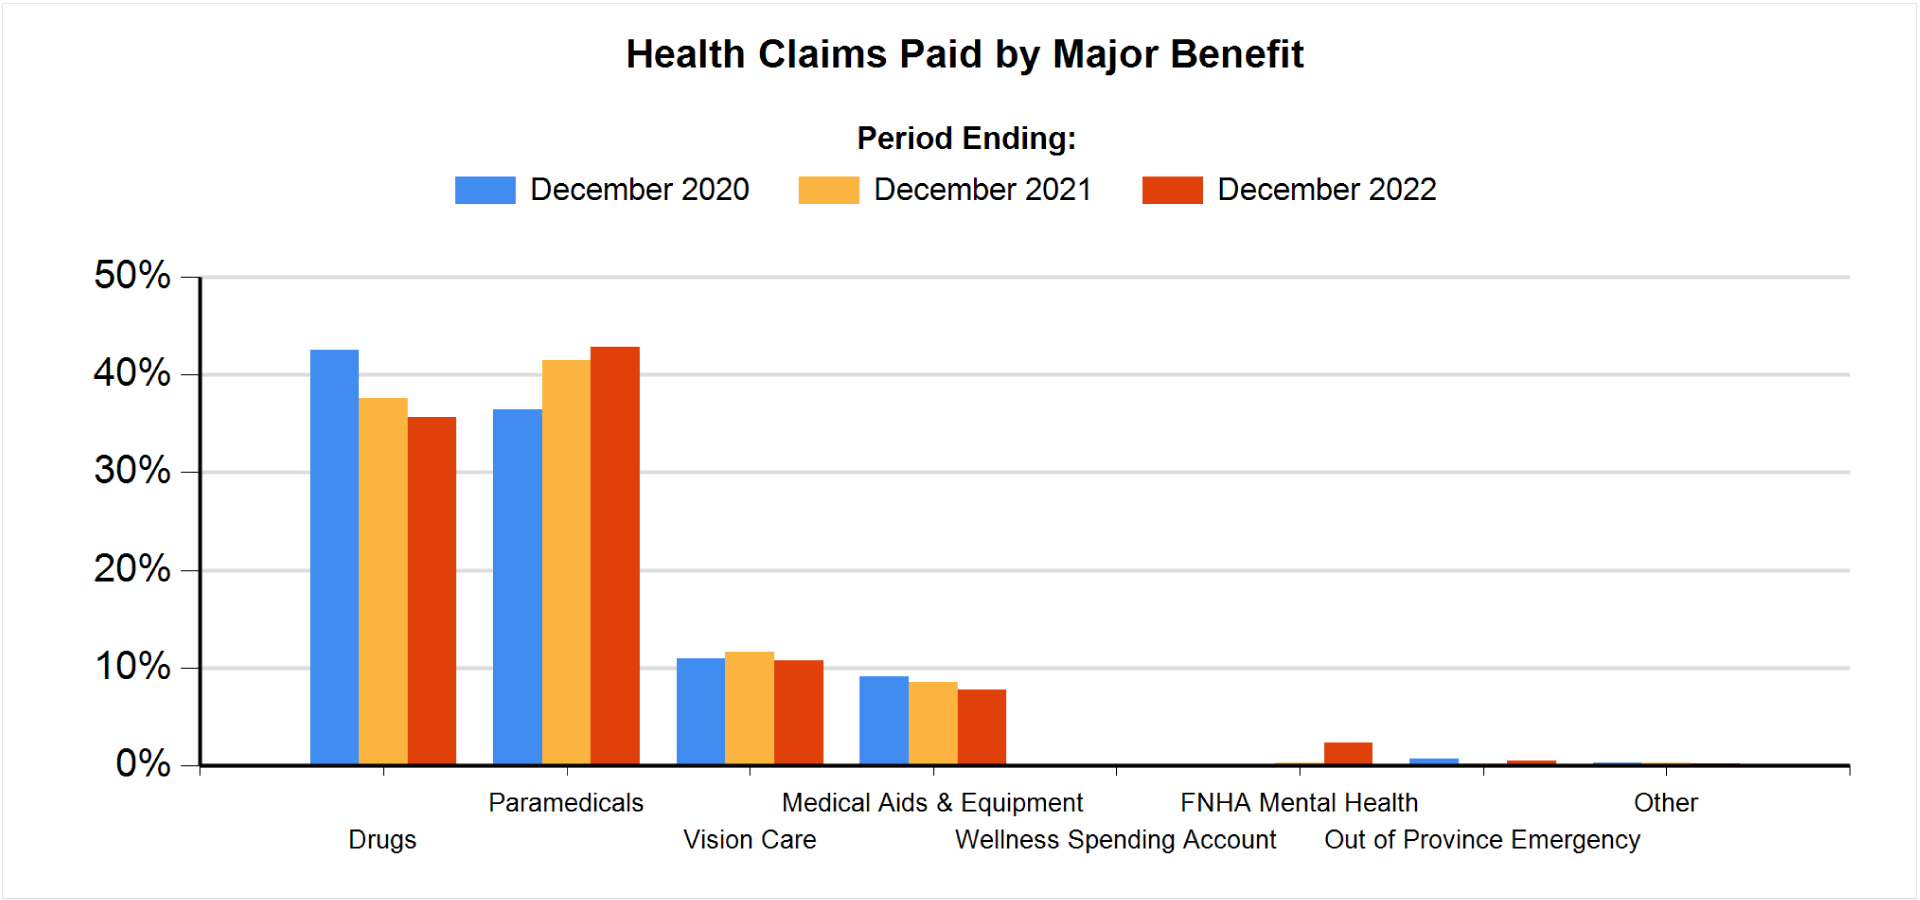 Health Claims Paid by Major Benefit